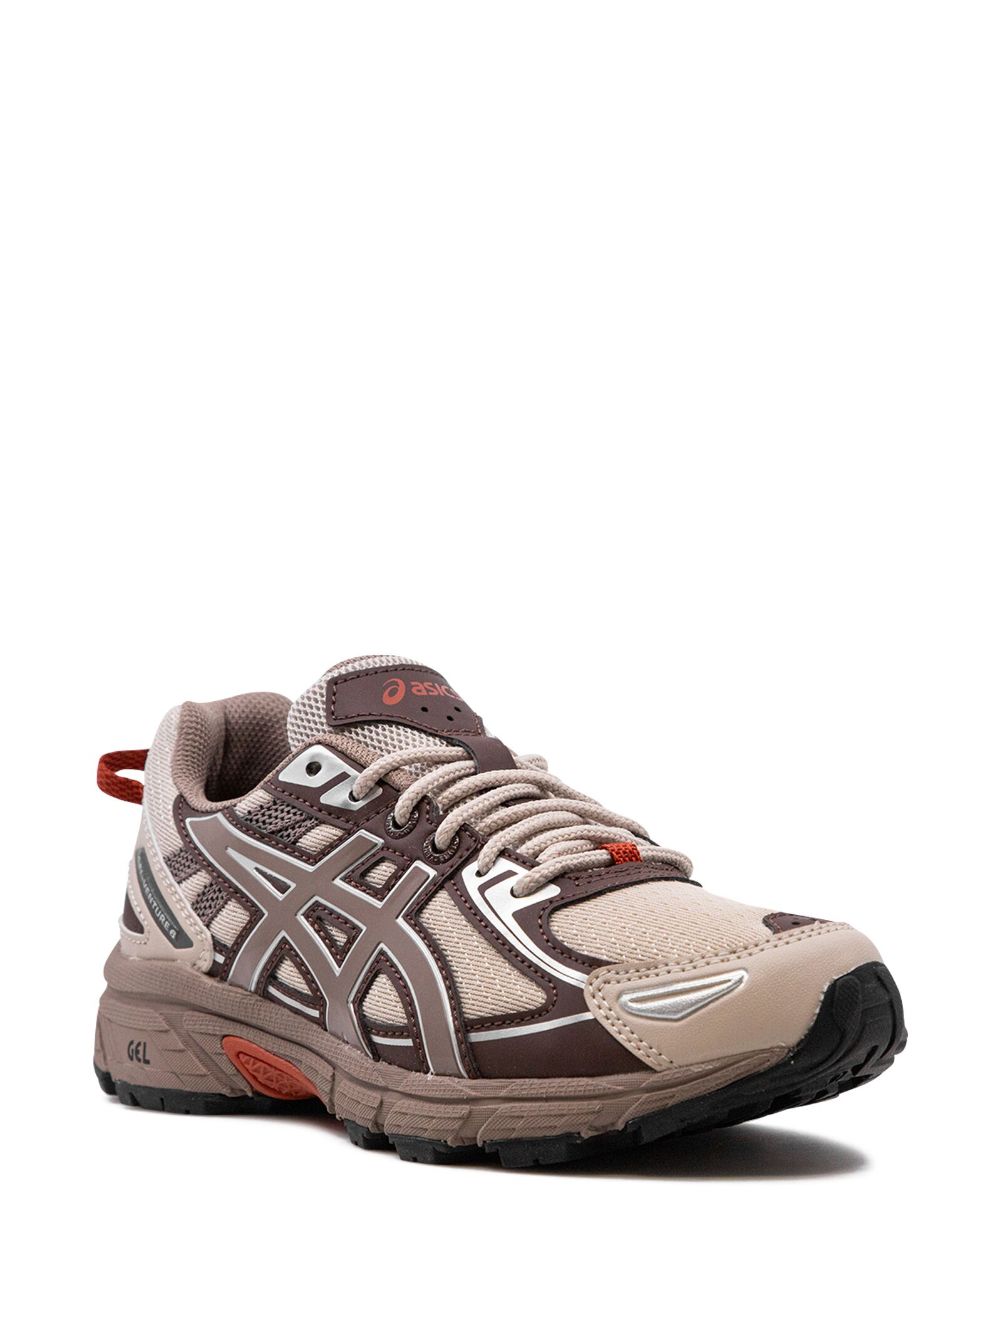 ASICS Gel-Venture 6 "Simply Taupe/Taupe Gray" sneakers - Beige